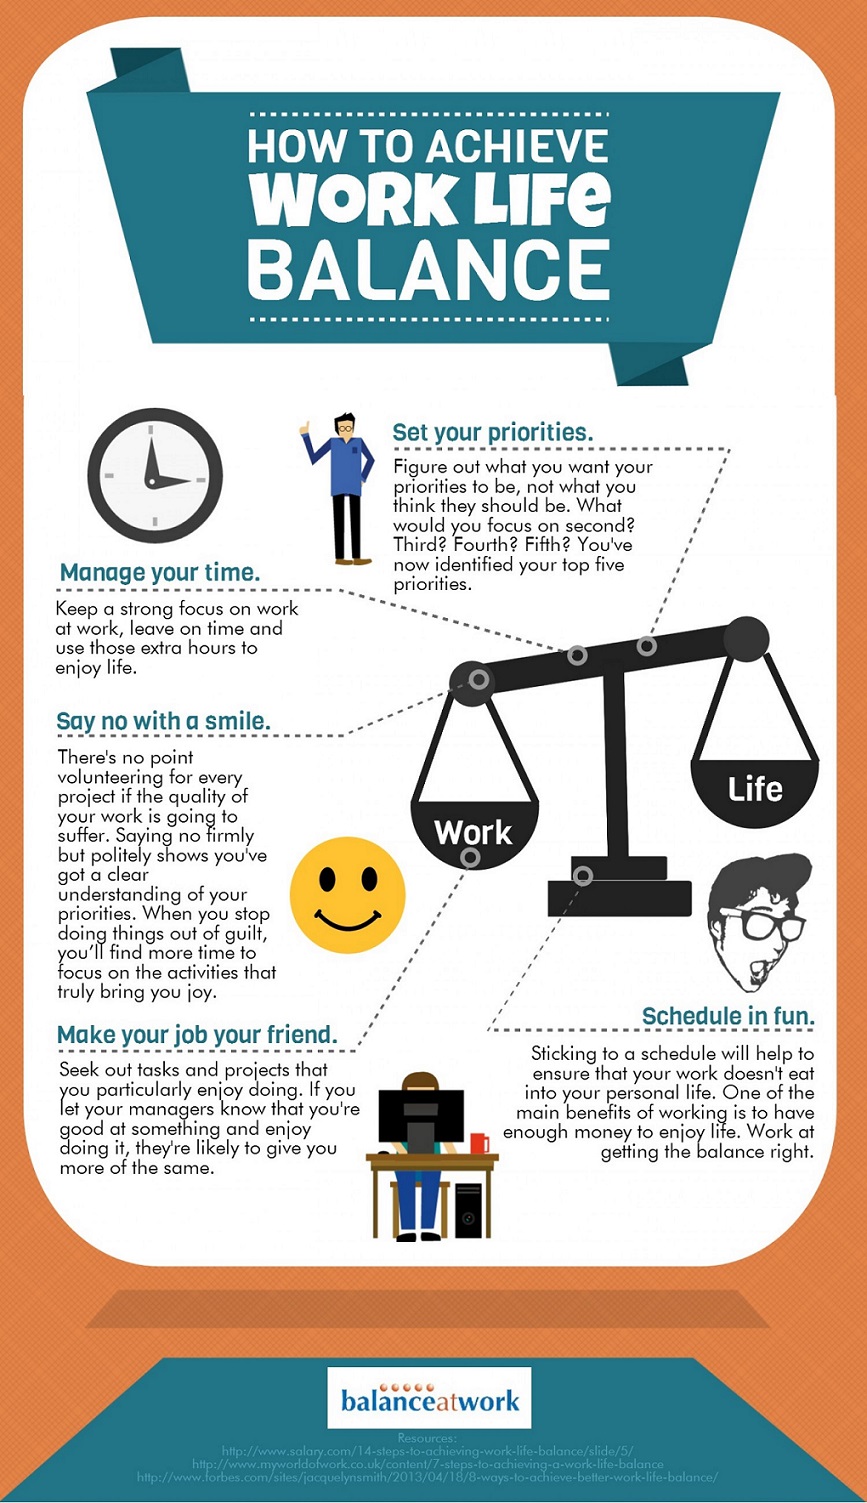 Top Tips to Achieve Work Life Balance [INFOGRAPHIC] - Learnist.org